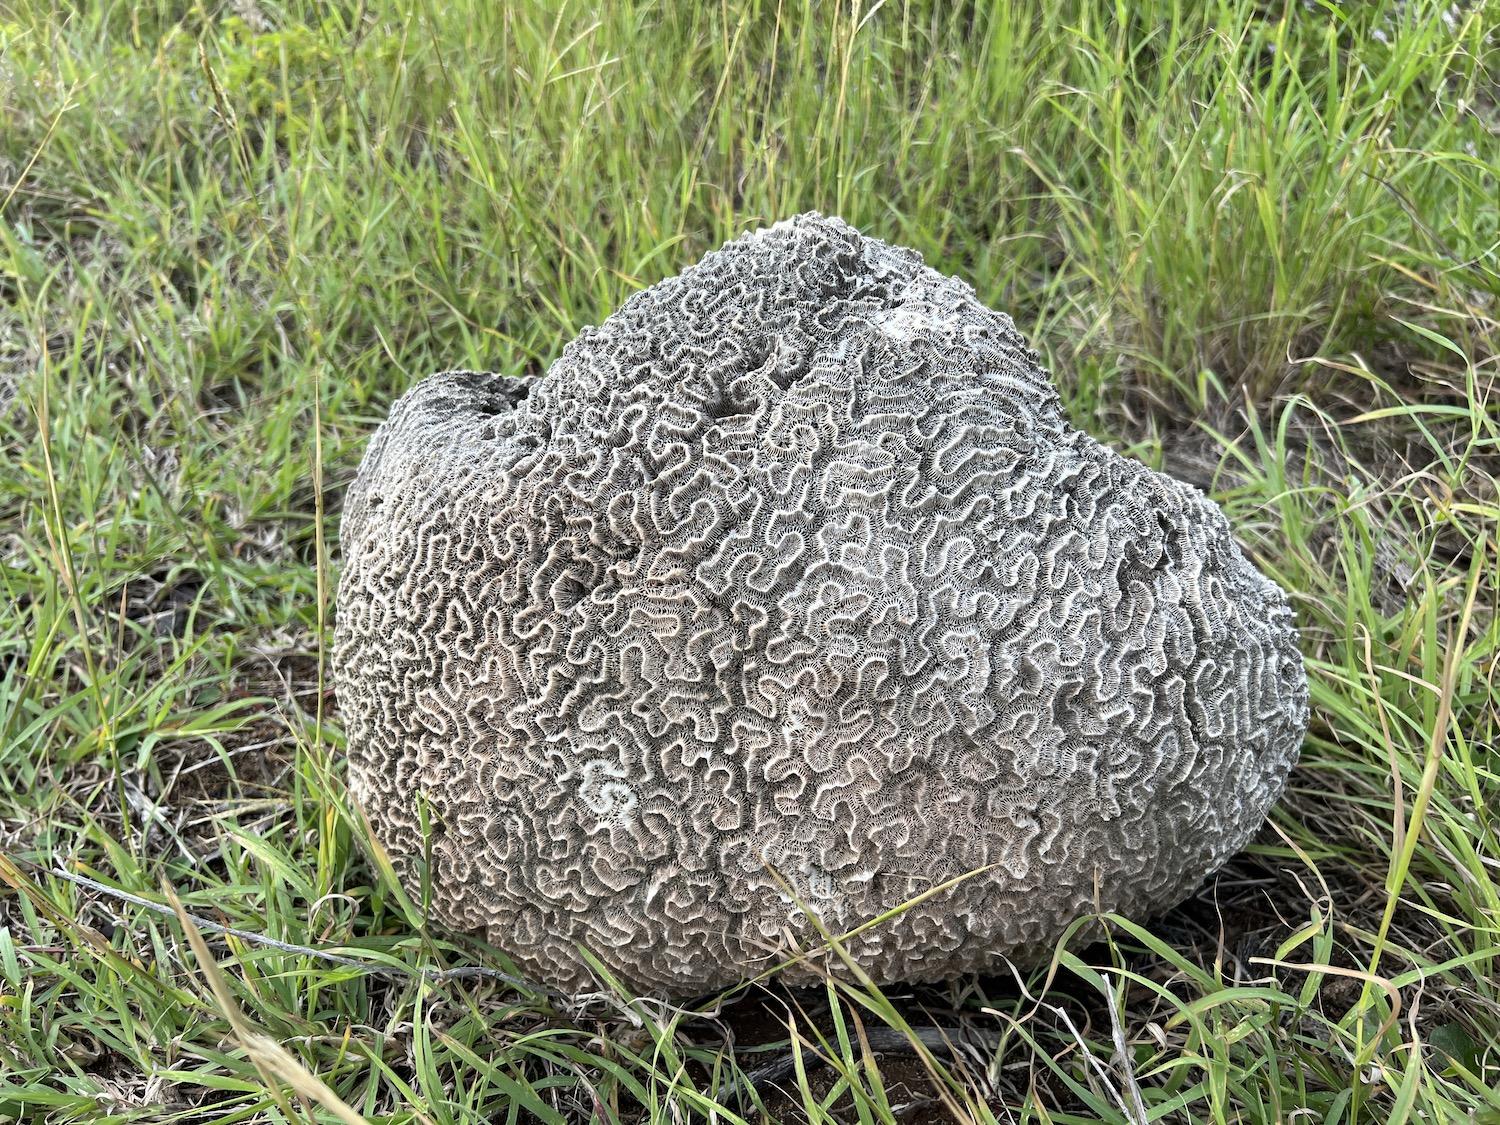 A large piece of what appears to be brain coral is shown on the beach at Pinel Island.